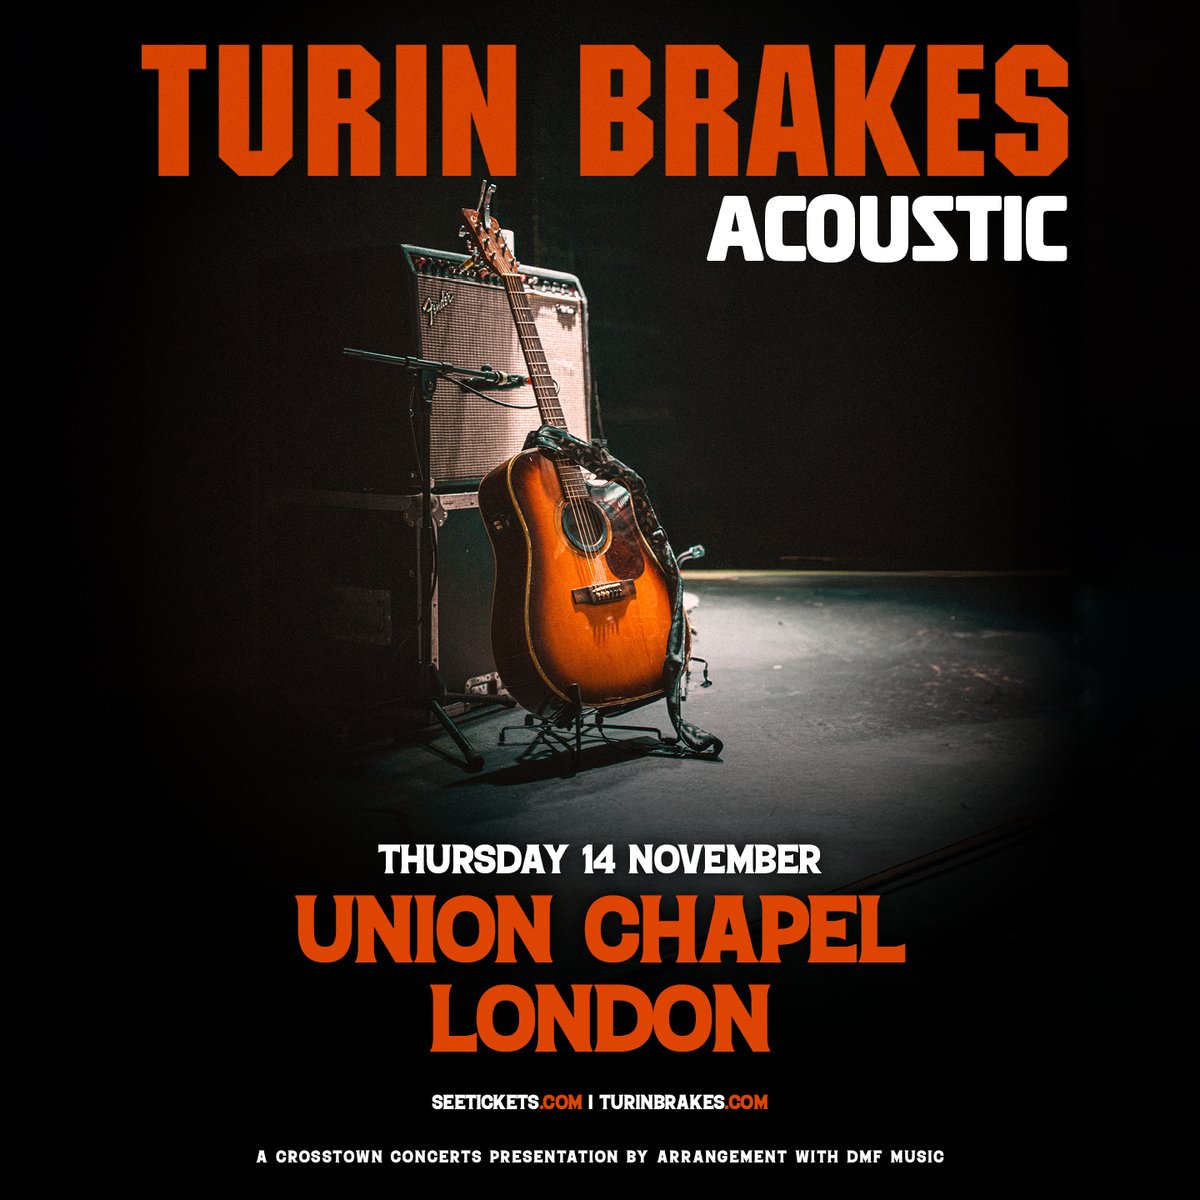 Huge Announcement 🔥 @turinbrakes | Thursday 14 November Bringing back their hugely popular acoustic show. 'It’s like dustbowl folk music refracted through inner-city noise' (NME) Set reminders for on sale this Fri 8 Mar, 10am at unionchapel.org.uk/venue/whats-on…